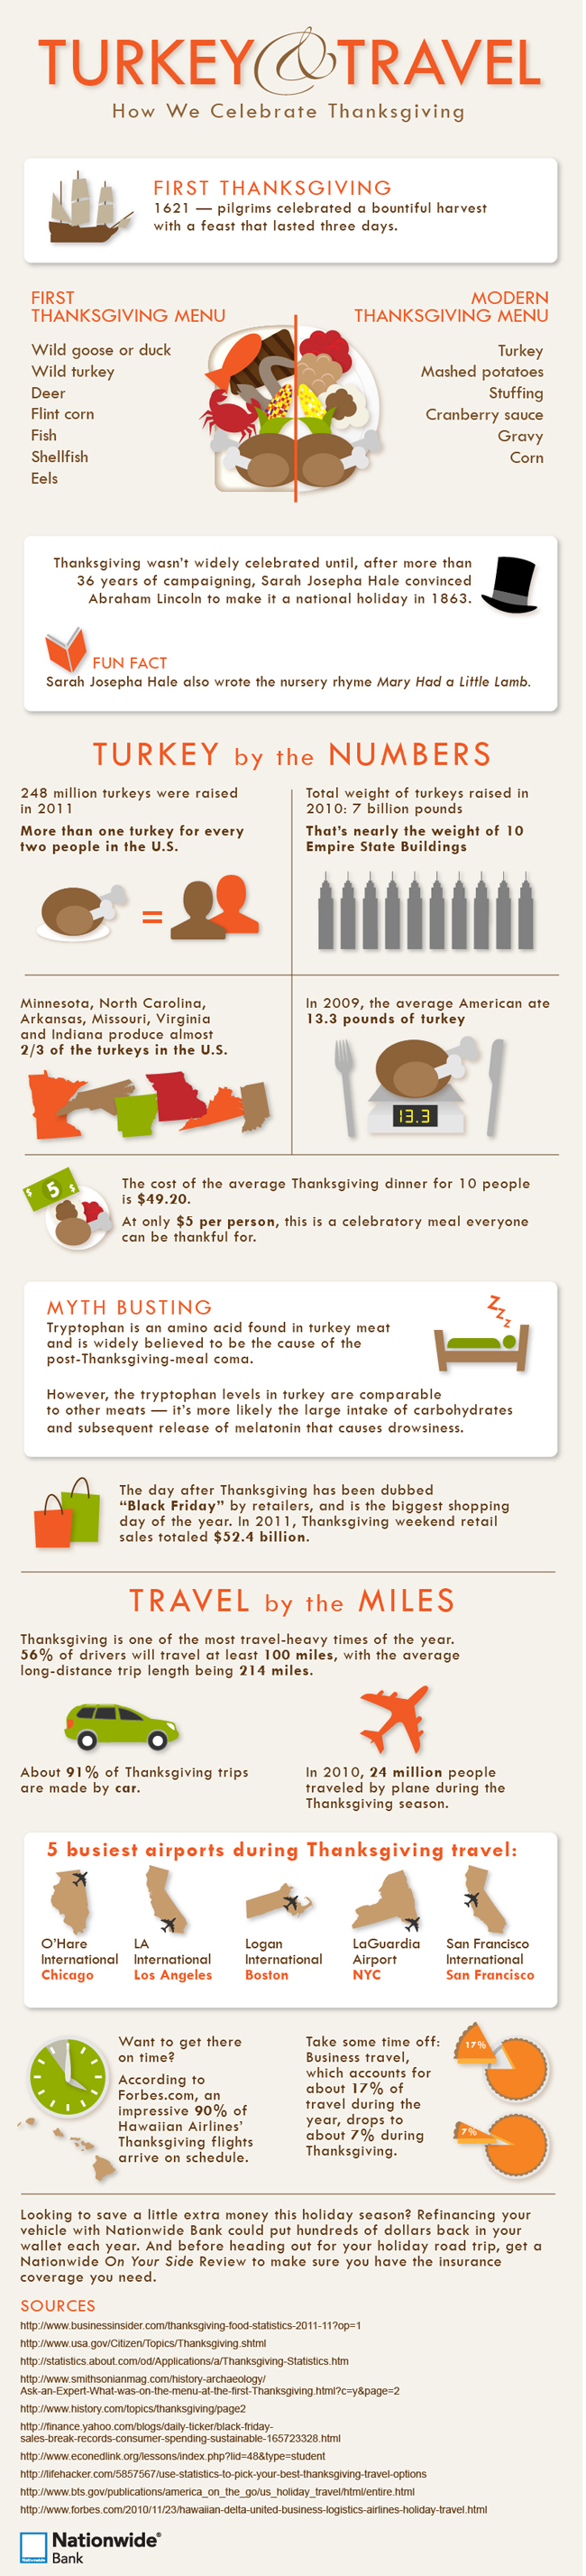 Learn interesting Thanksgiving facts and travel statistics in this Thanksgiving infographic.